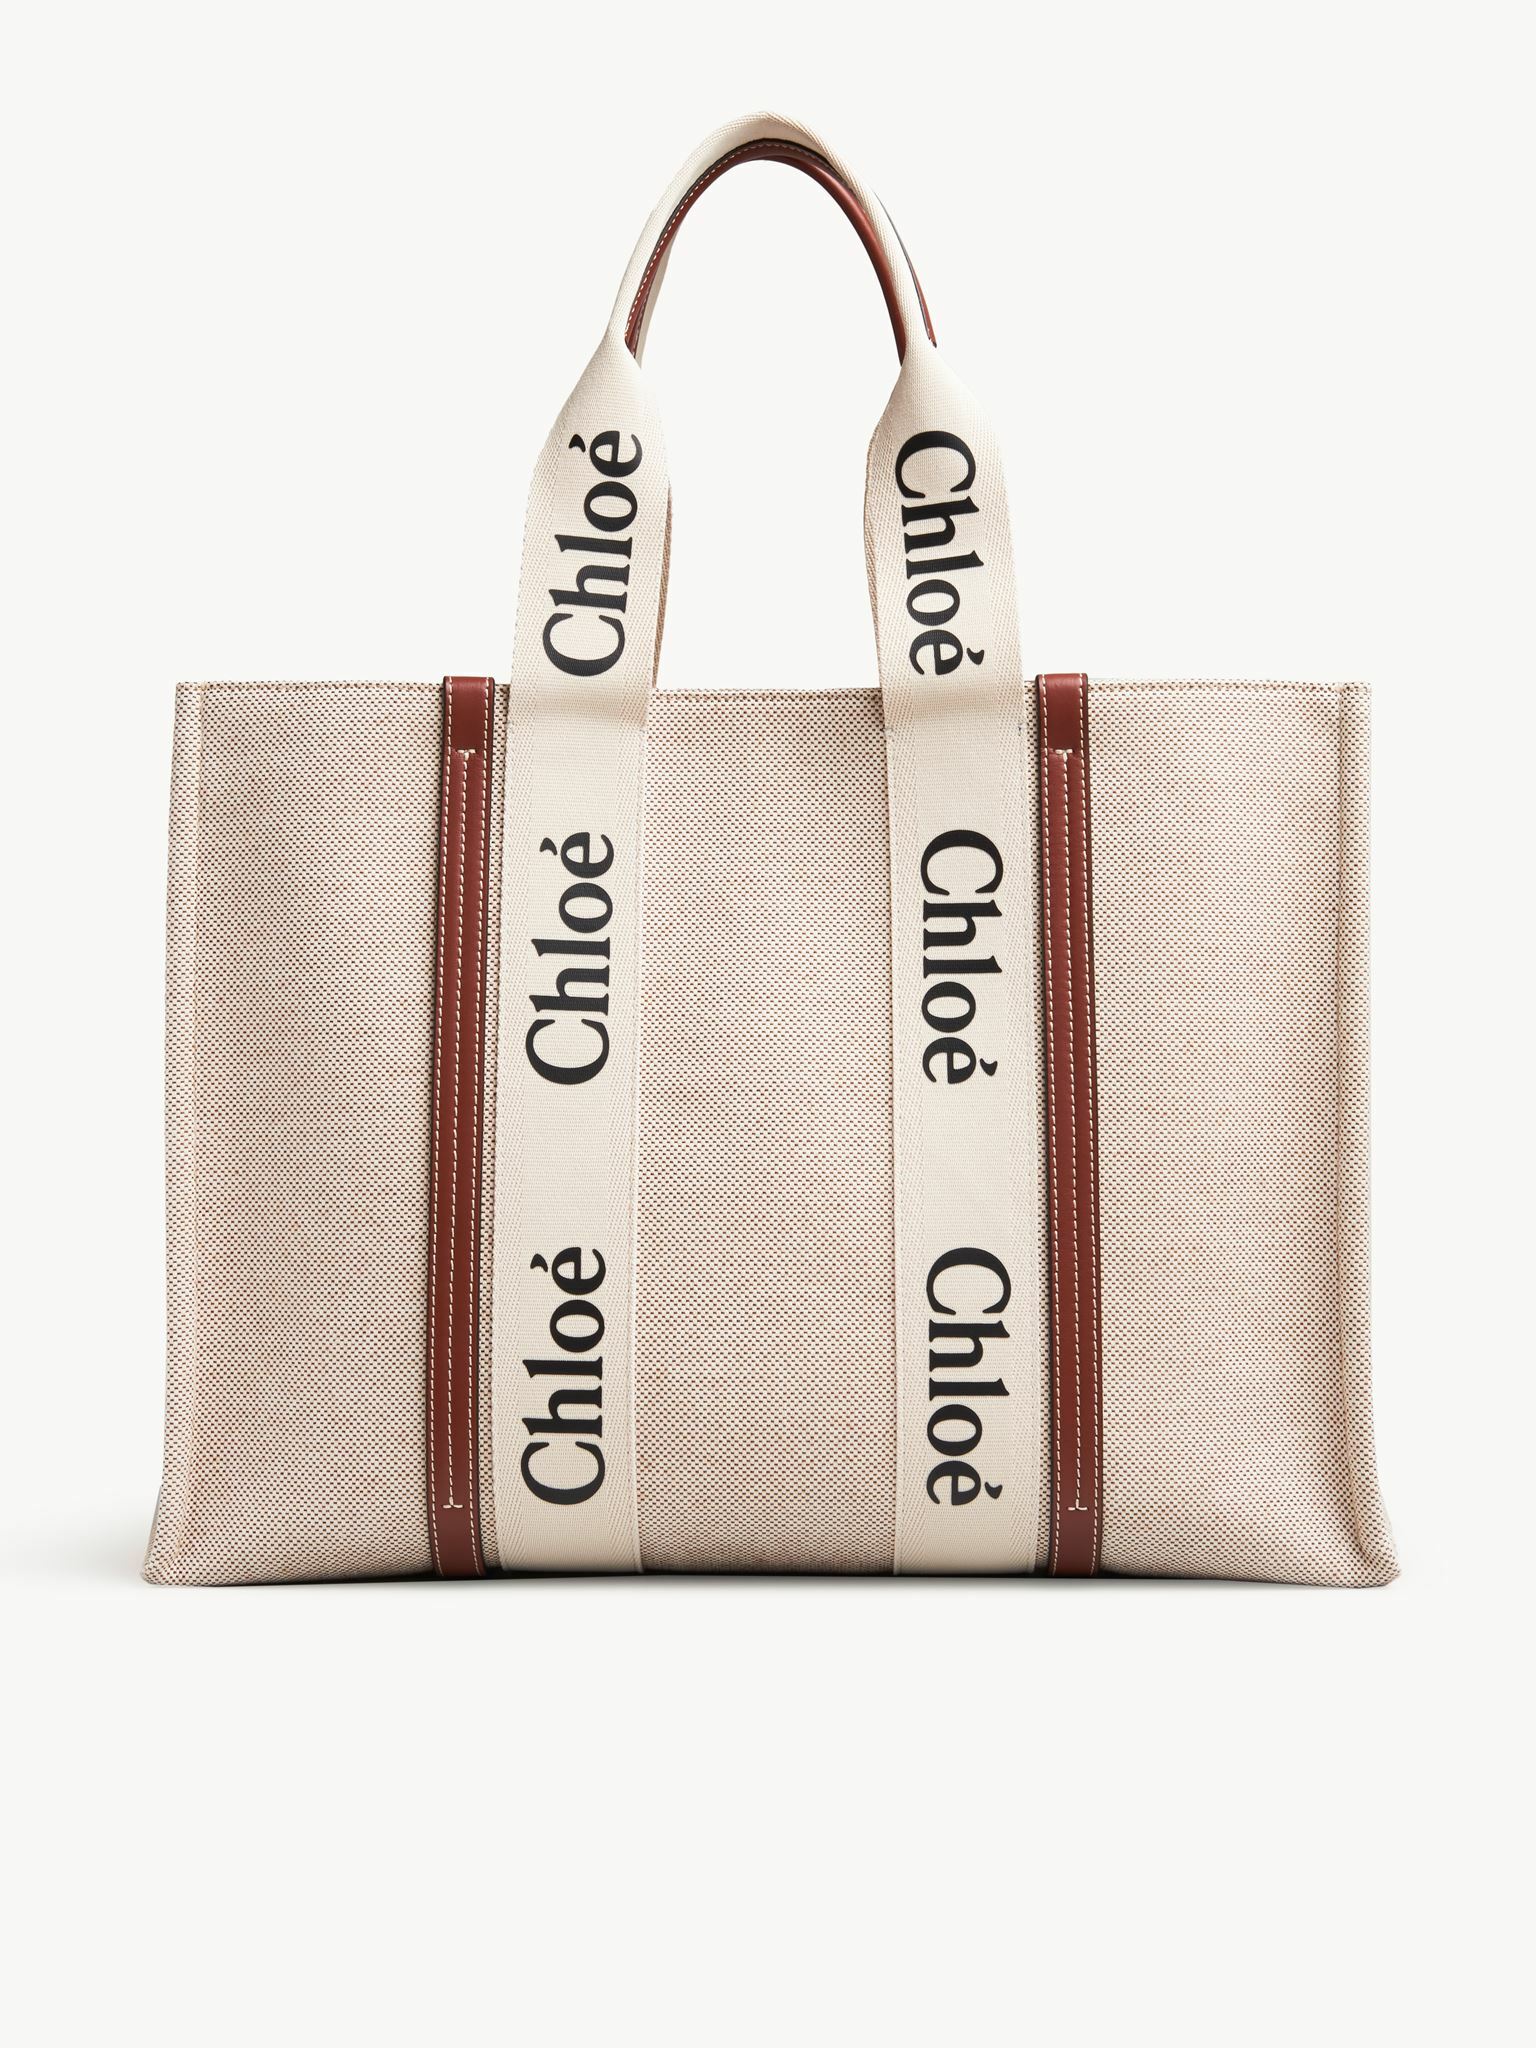 CHLOE LARGE WOODY TOTE BAG IN COTTON CANVAS & SHINY CA